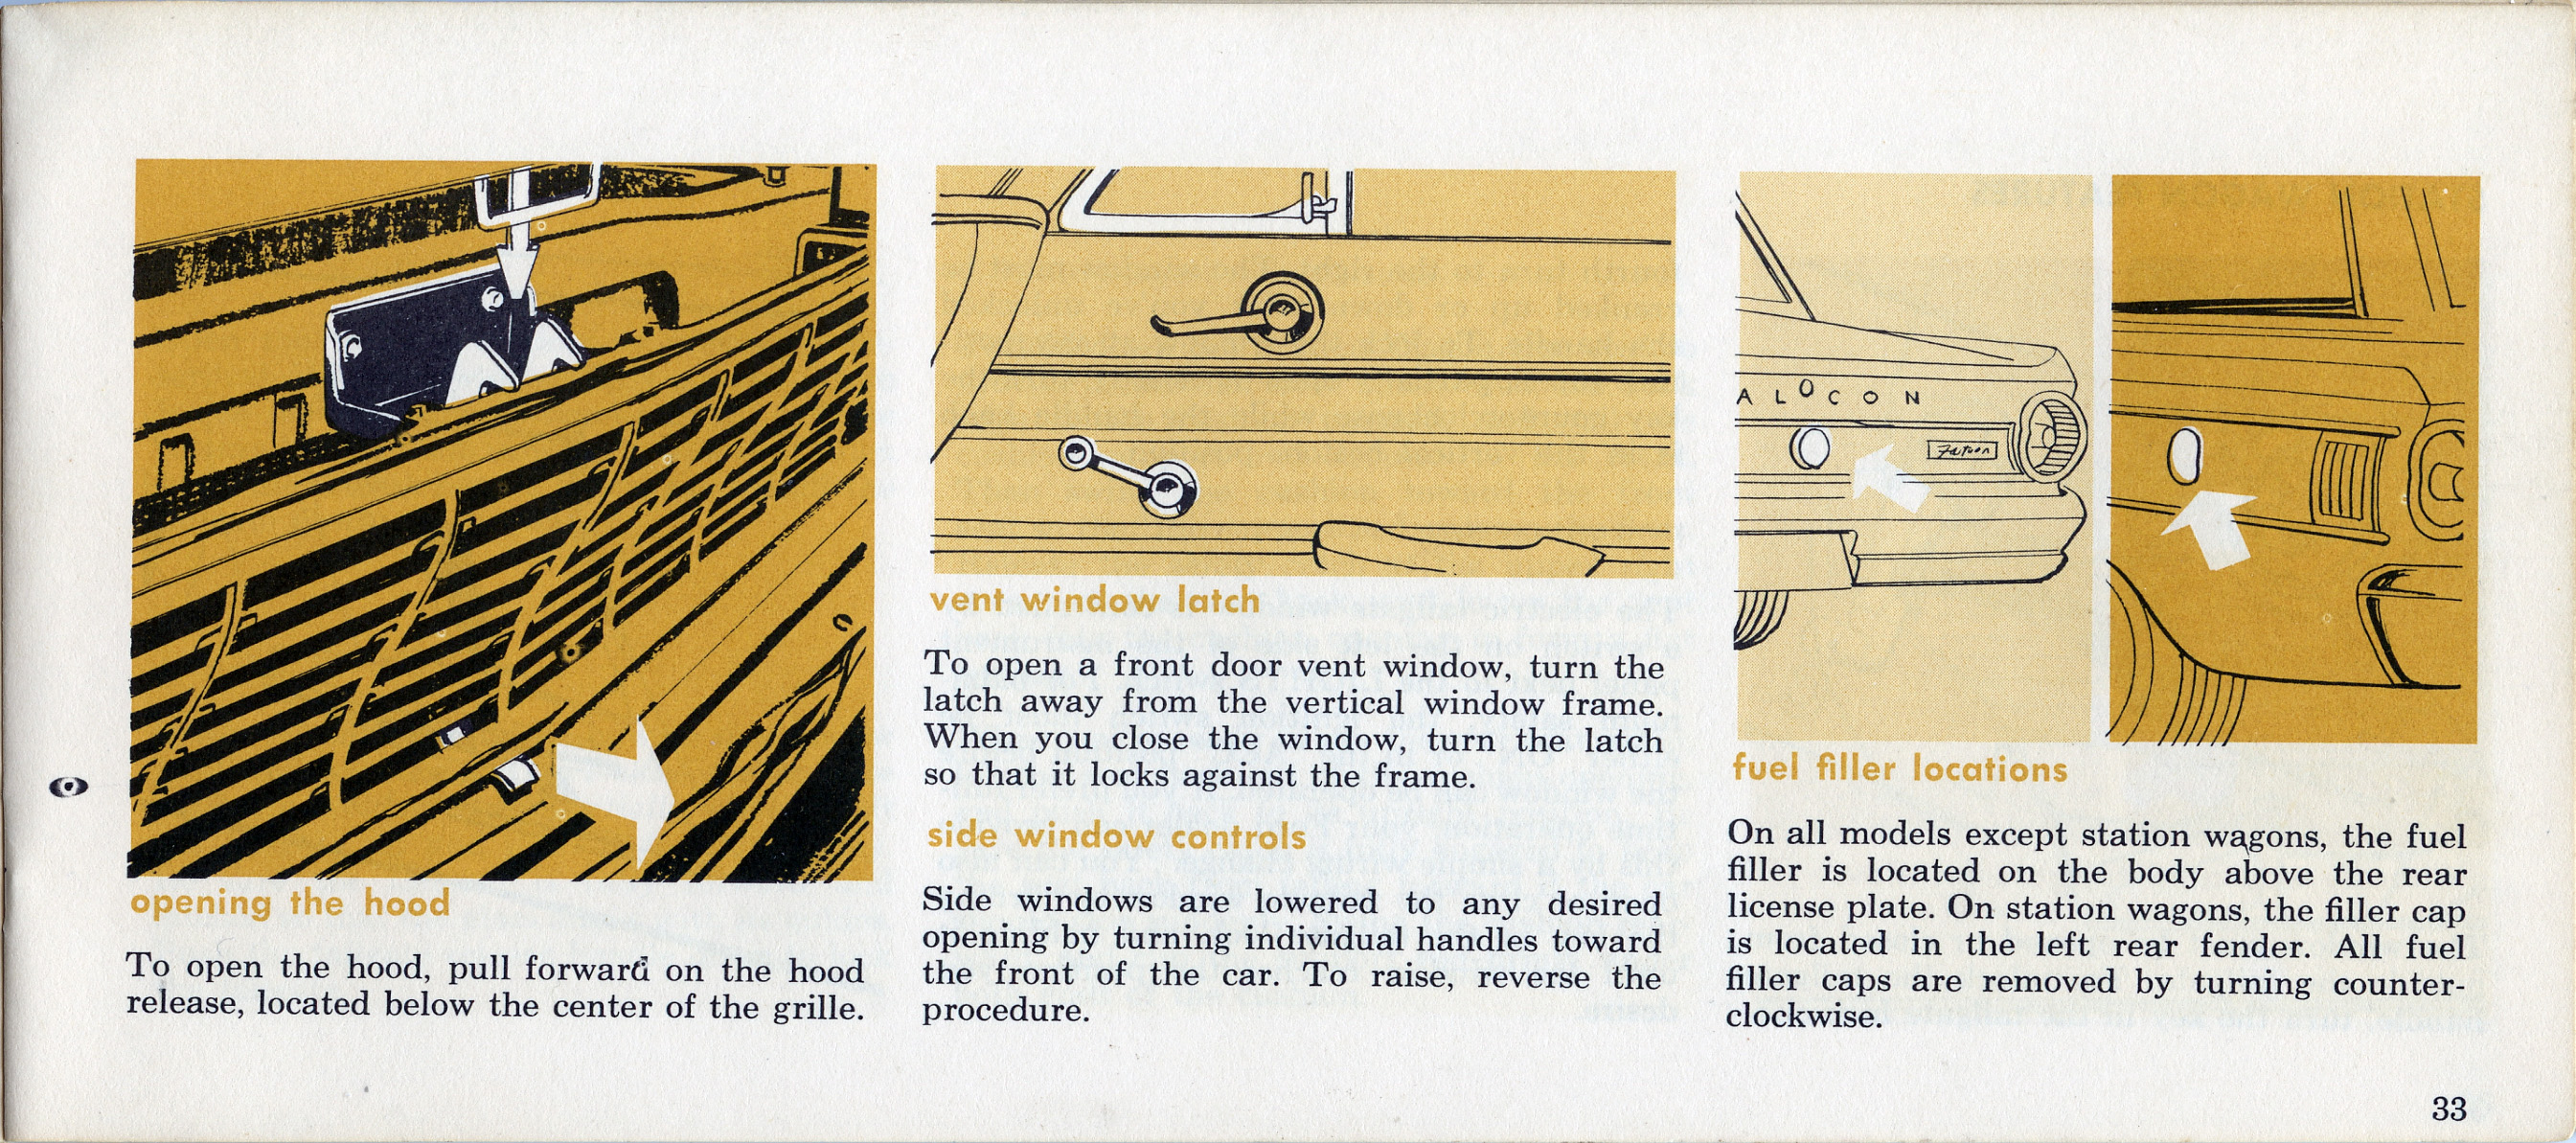 1964 Ford Falcon Owners Manual Page 62